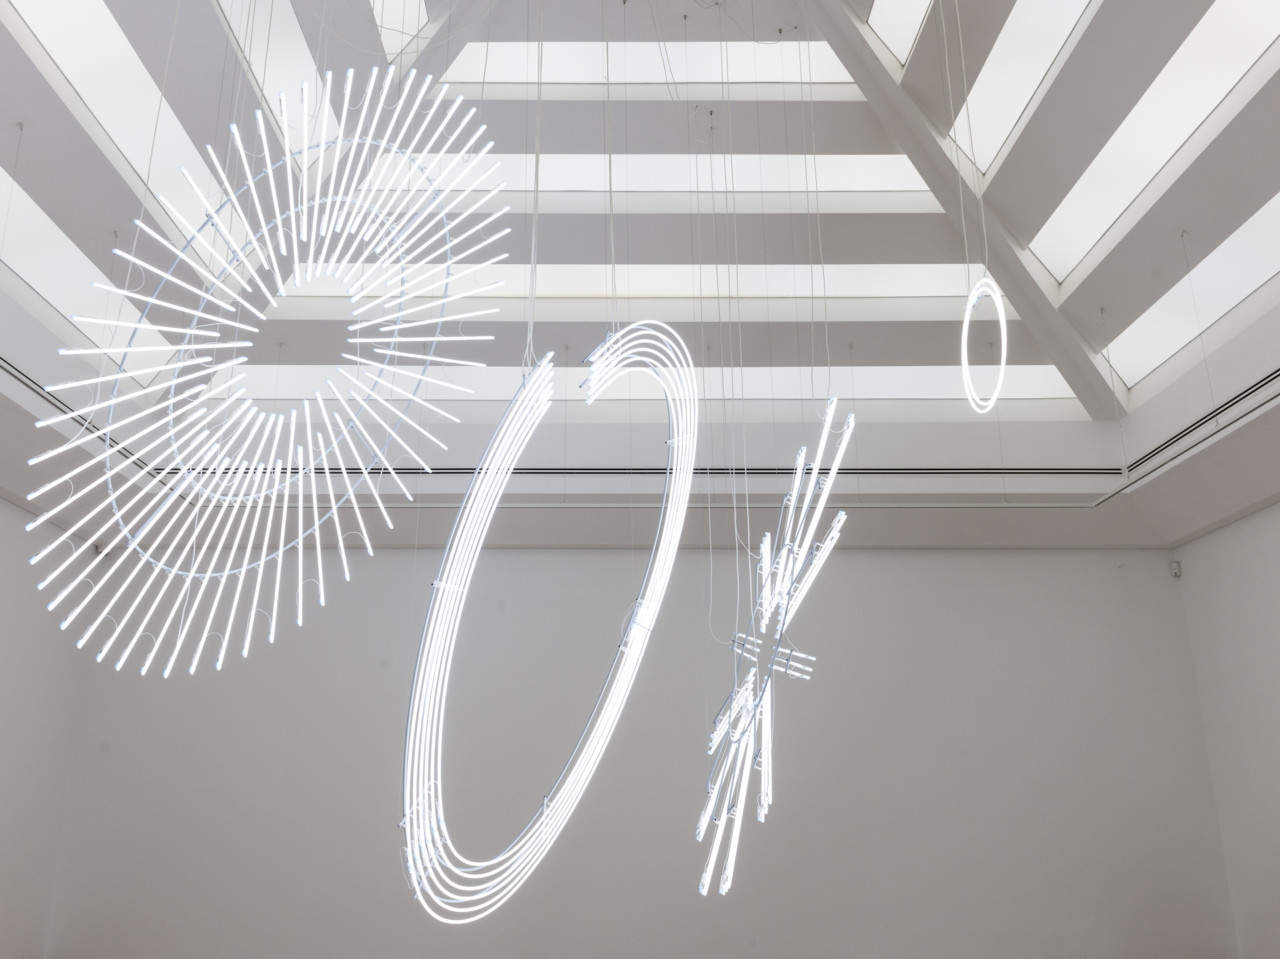 Cerith Wyn Evans, Radiant fold (…the Illuminating Gas), 2017/18. Presented to Amgueddfa Cymru – National Museum Wales by the Contemporary Art Society through Great Works, supported by the Sfumato Foundation, 2018. © Cerith Wyn Evans.